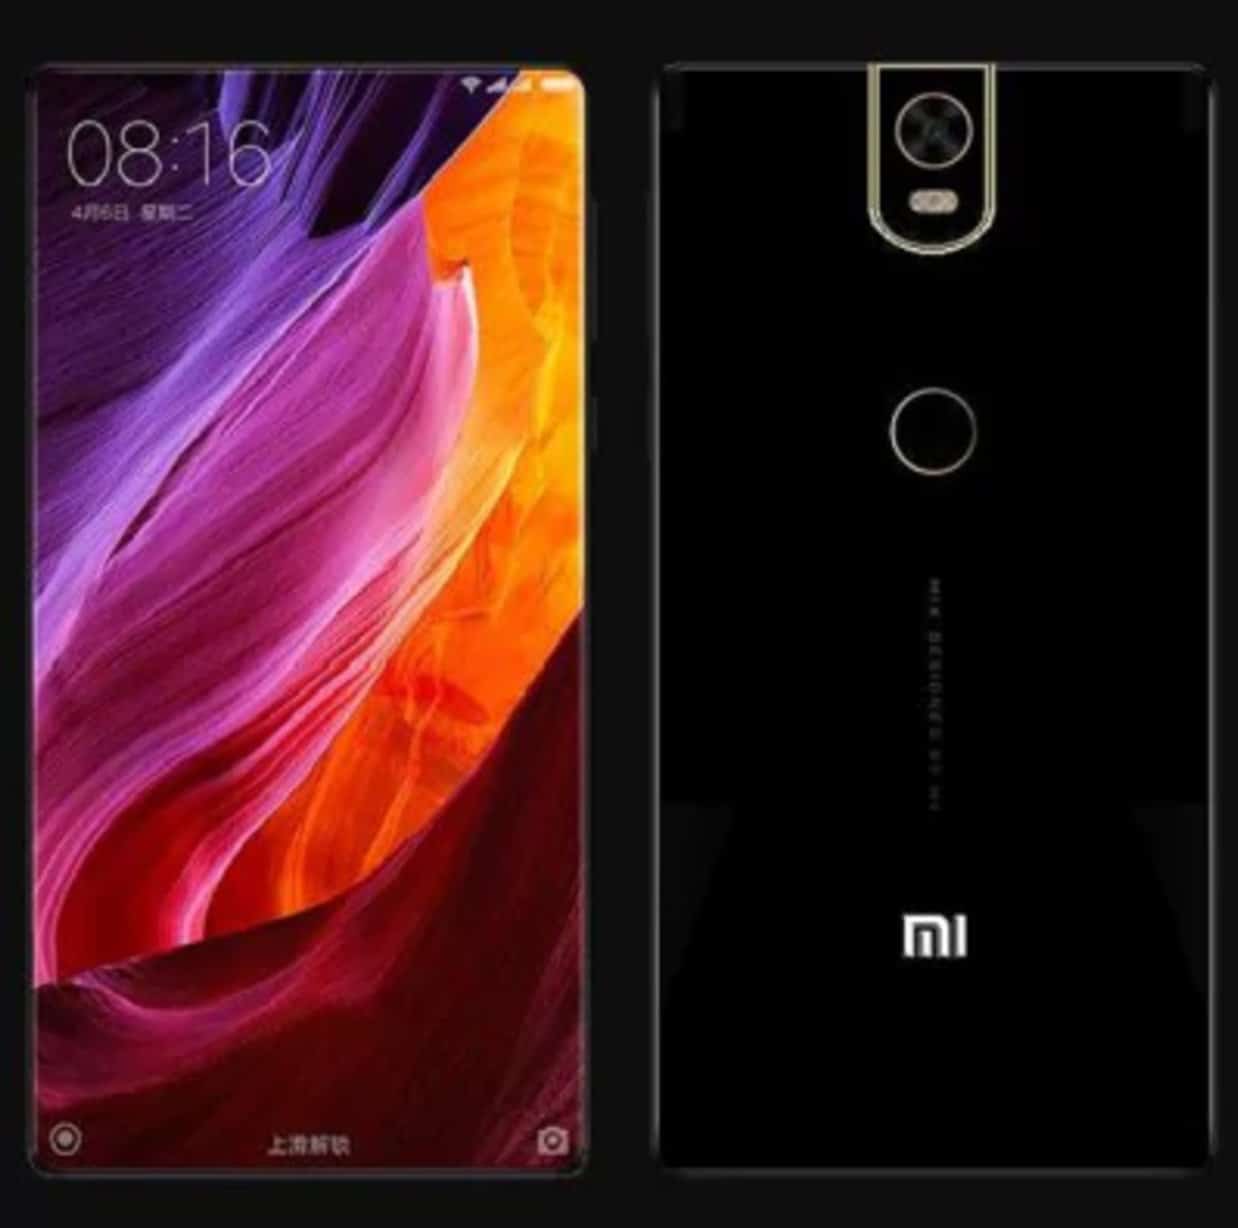 New xiaomi mi mix 2 rendered images appears & looks remarkable